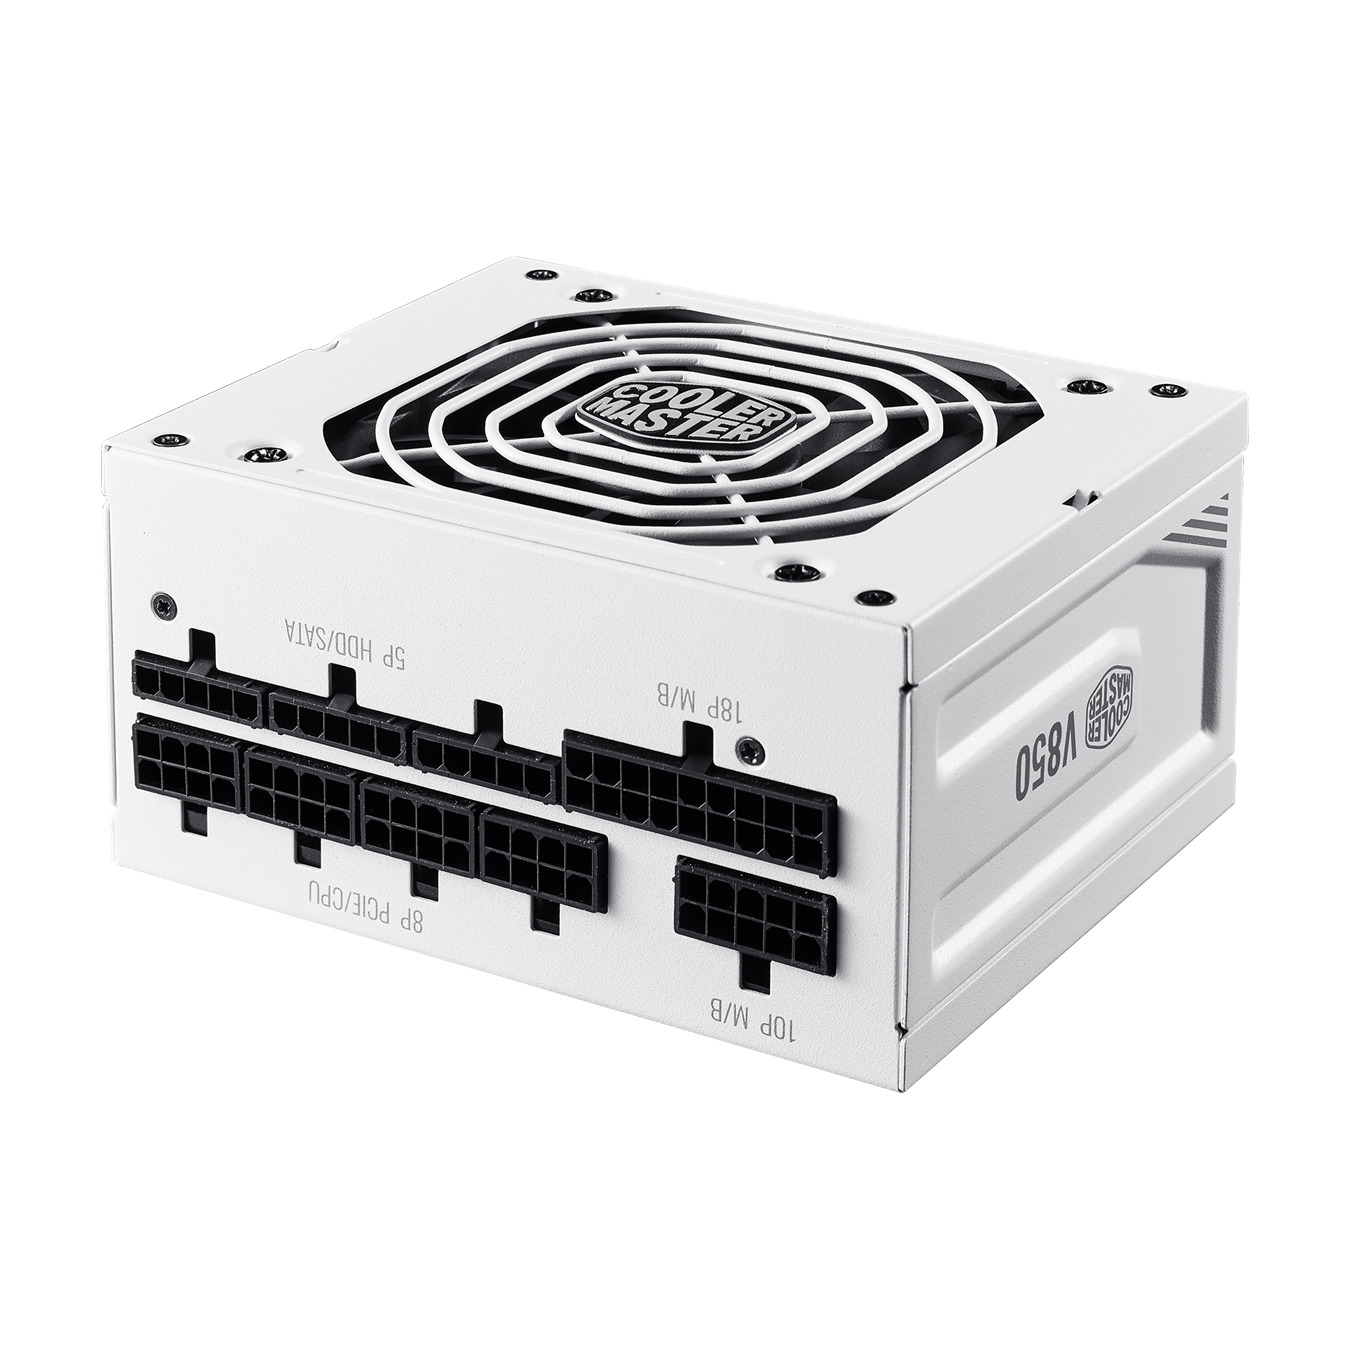 V850 SFX Gold White Edition - fully customizable cabling reduces clutter, increases airflow